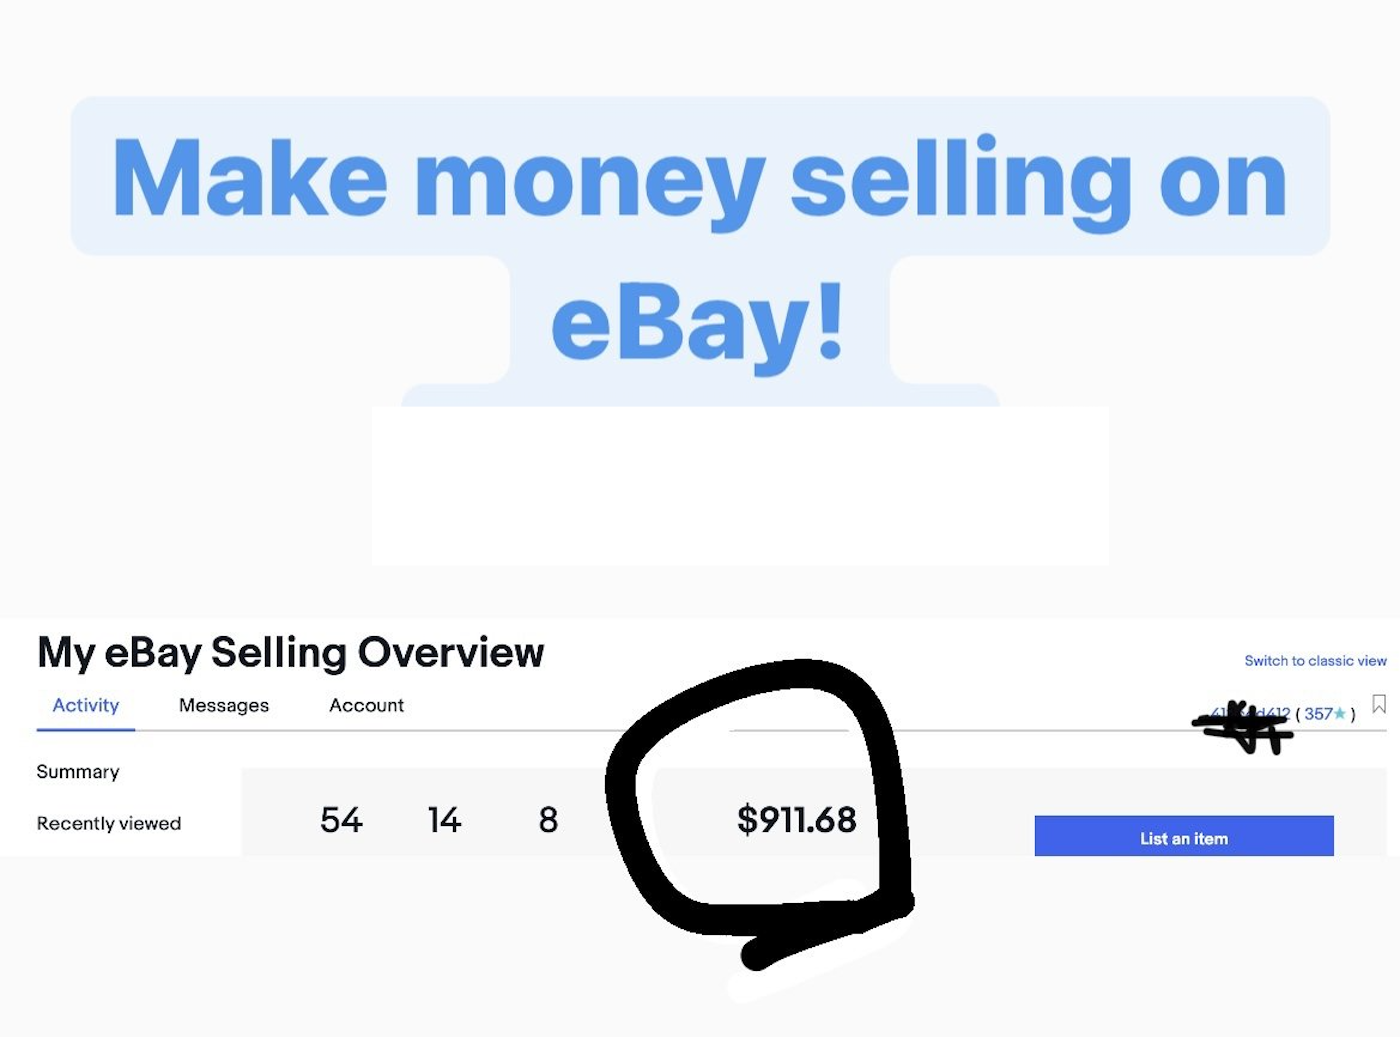 eBay in 10 Pages: A Guide to Making Money from Your Mailbox (Ebook) - EDU HUSTLE